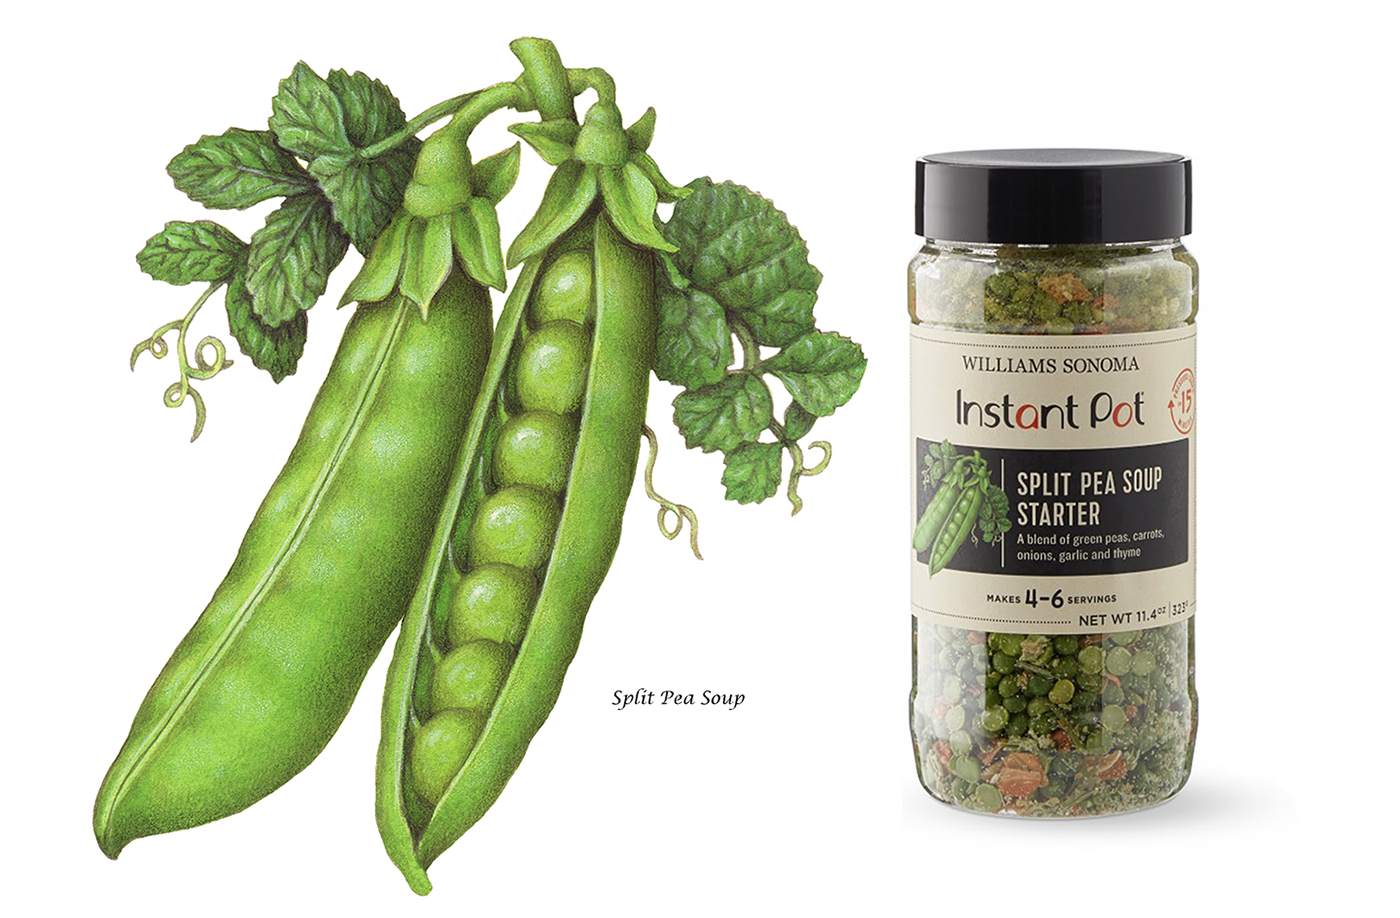 Botanical illustration of a pea plant used on packaging for Williams Sonoma.